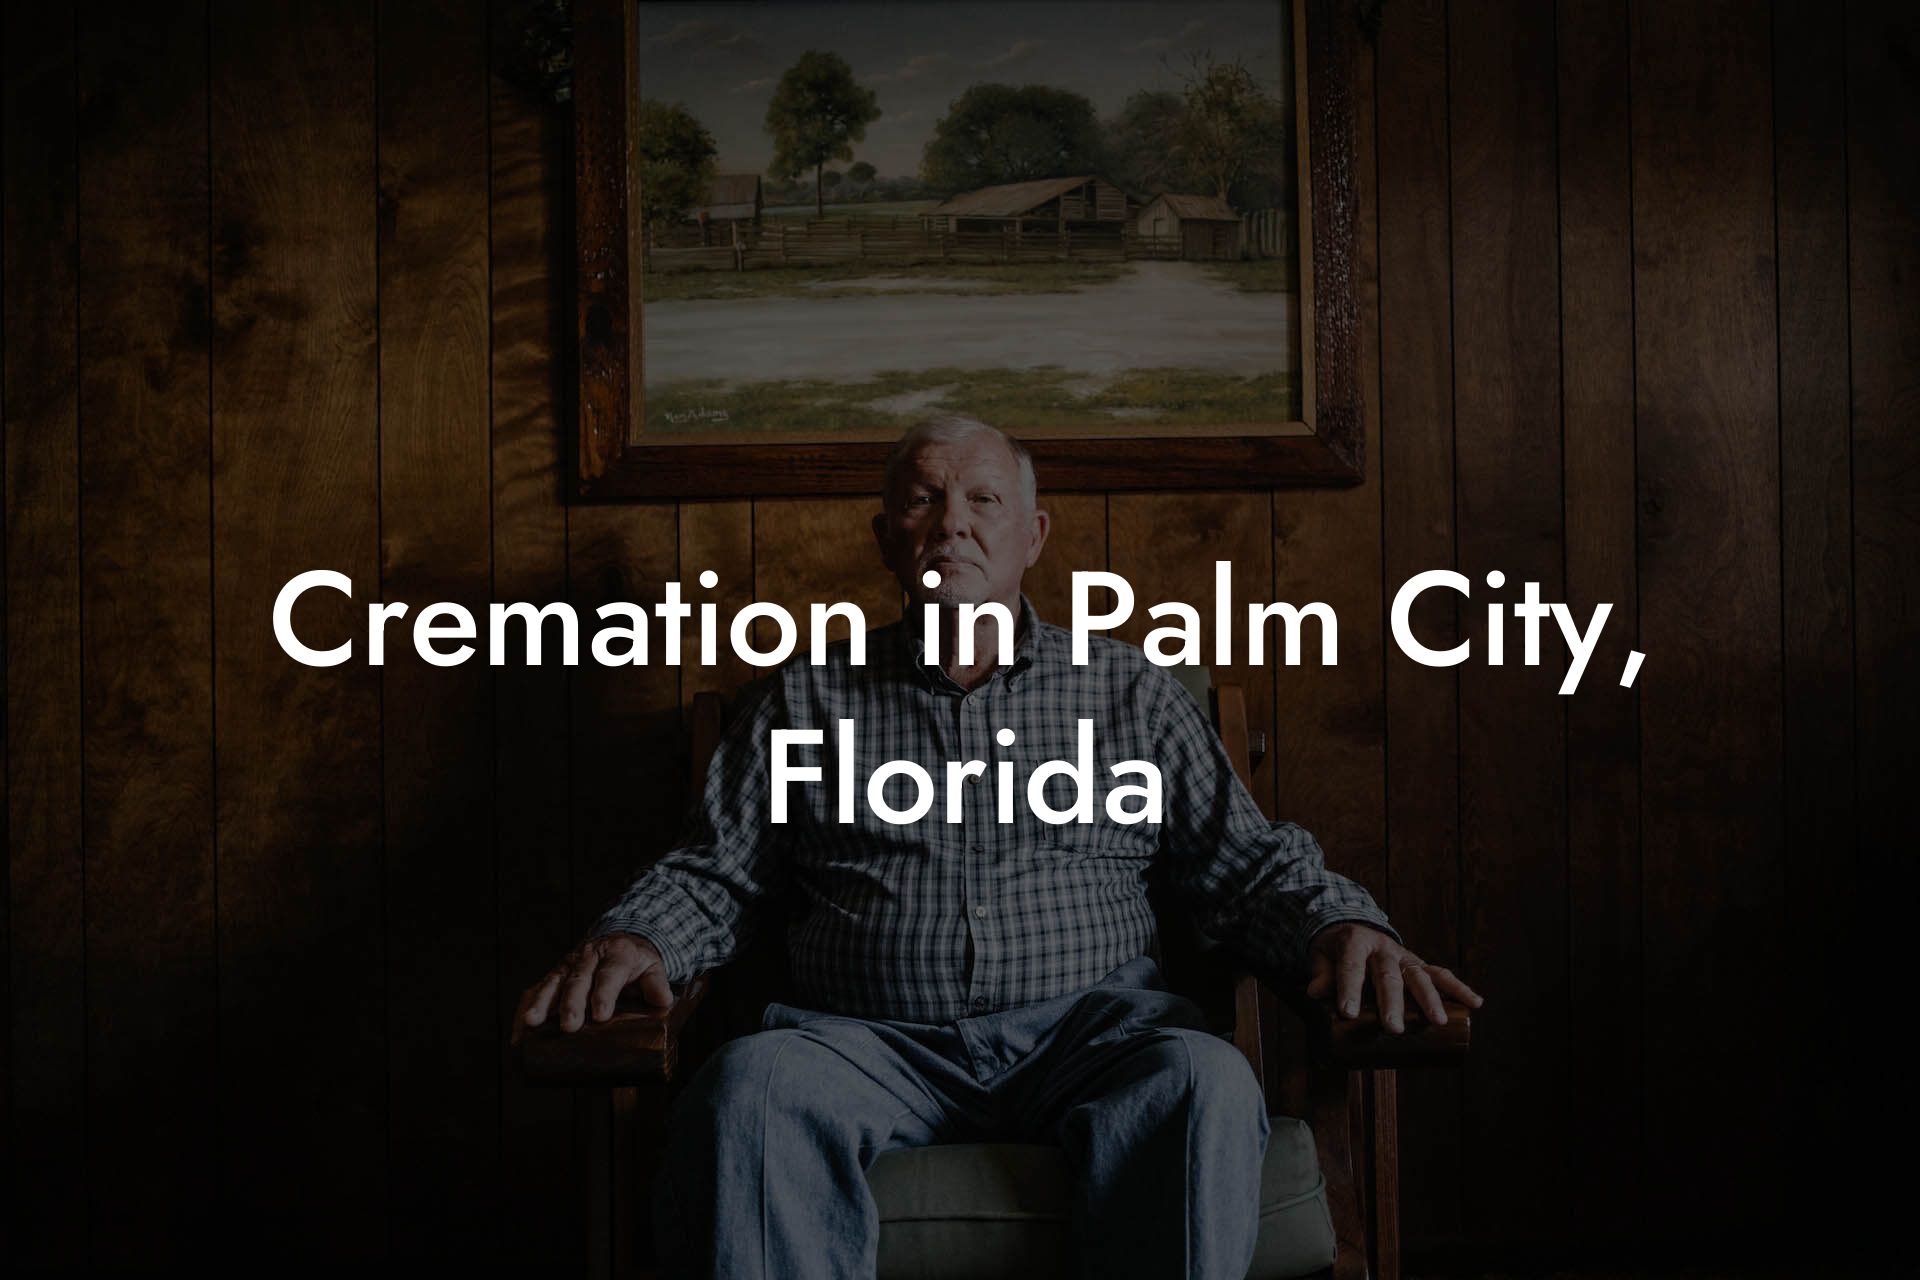 Cremation in Palm City, Florida